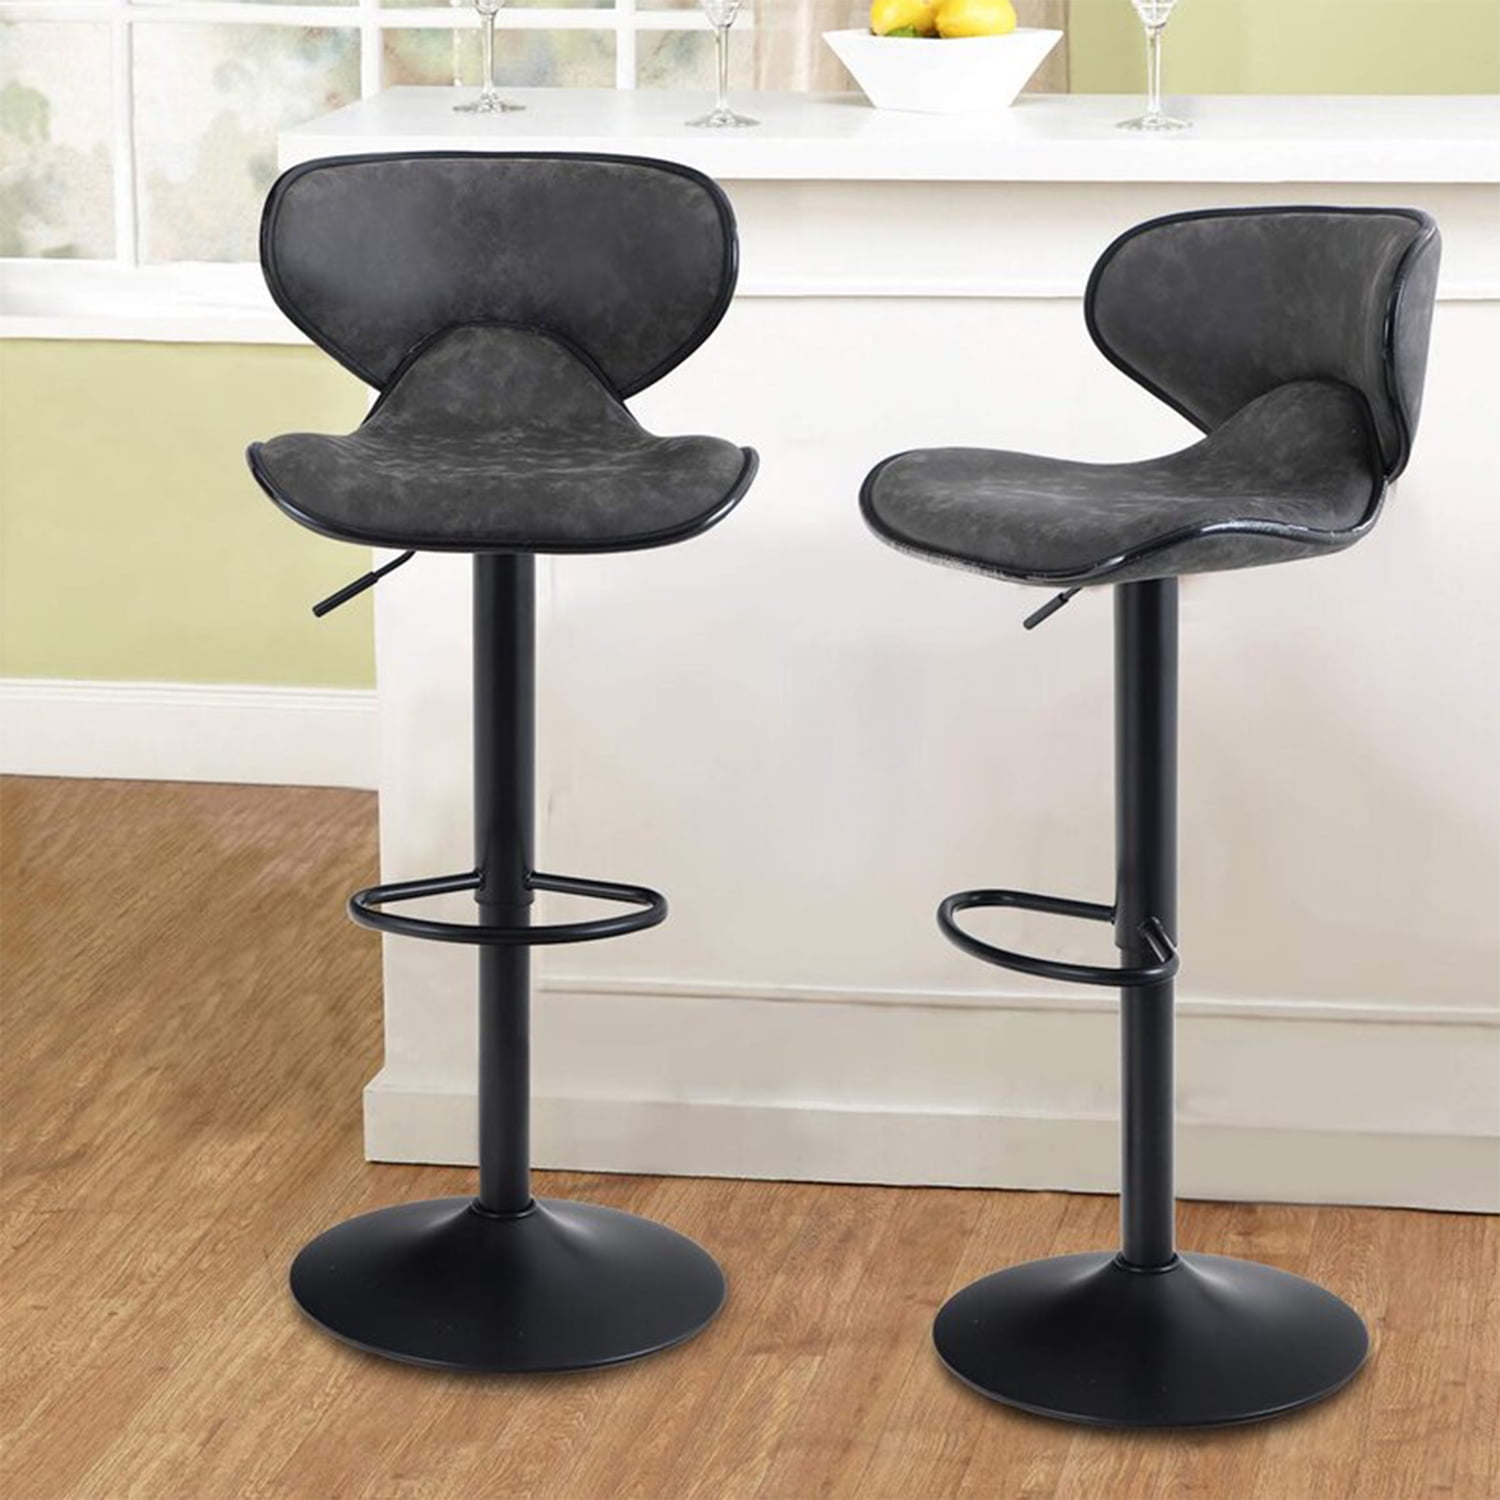 Set of 2 Micha Saddle 24"H Counter Stool Chair Espresso PU Leather Seat Kitchen 